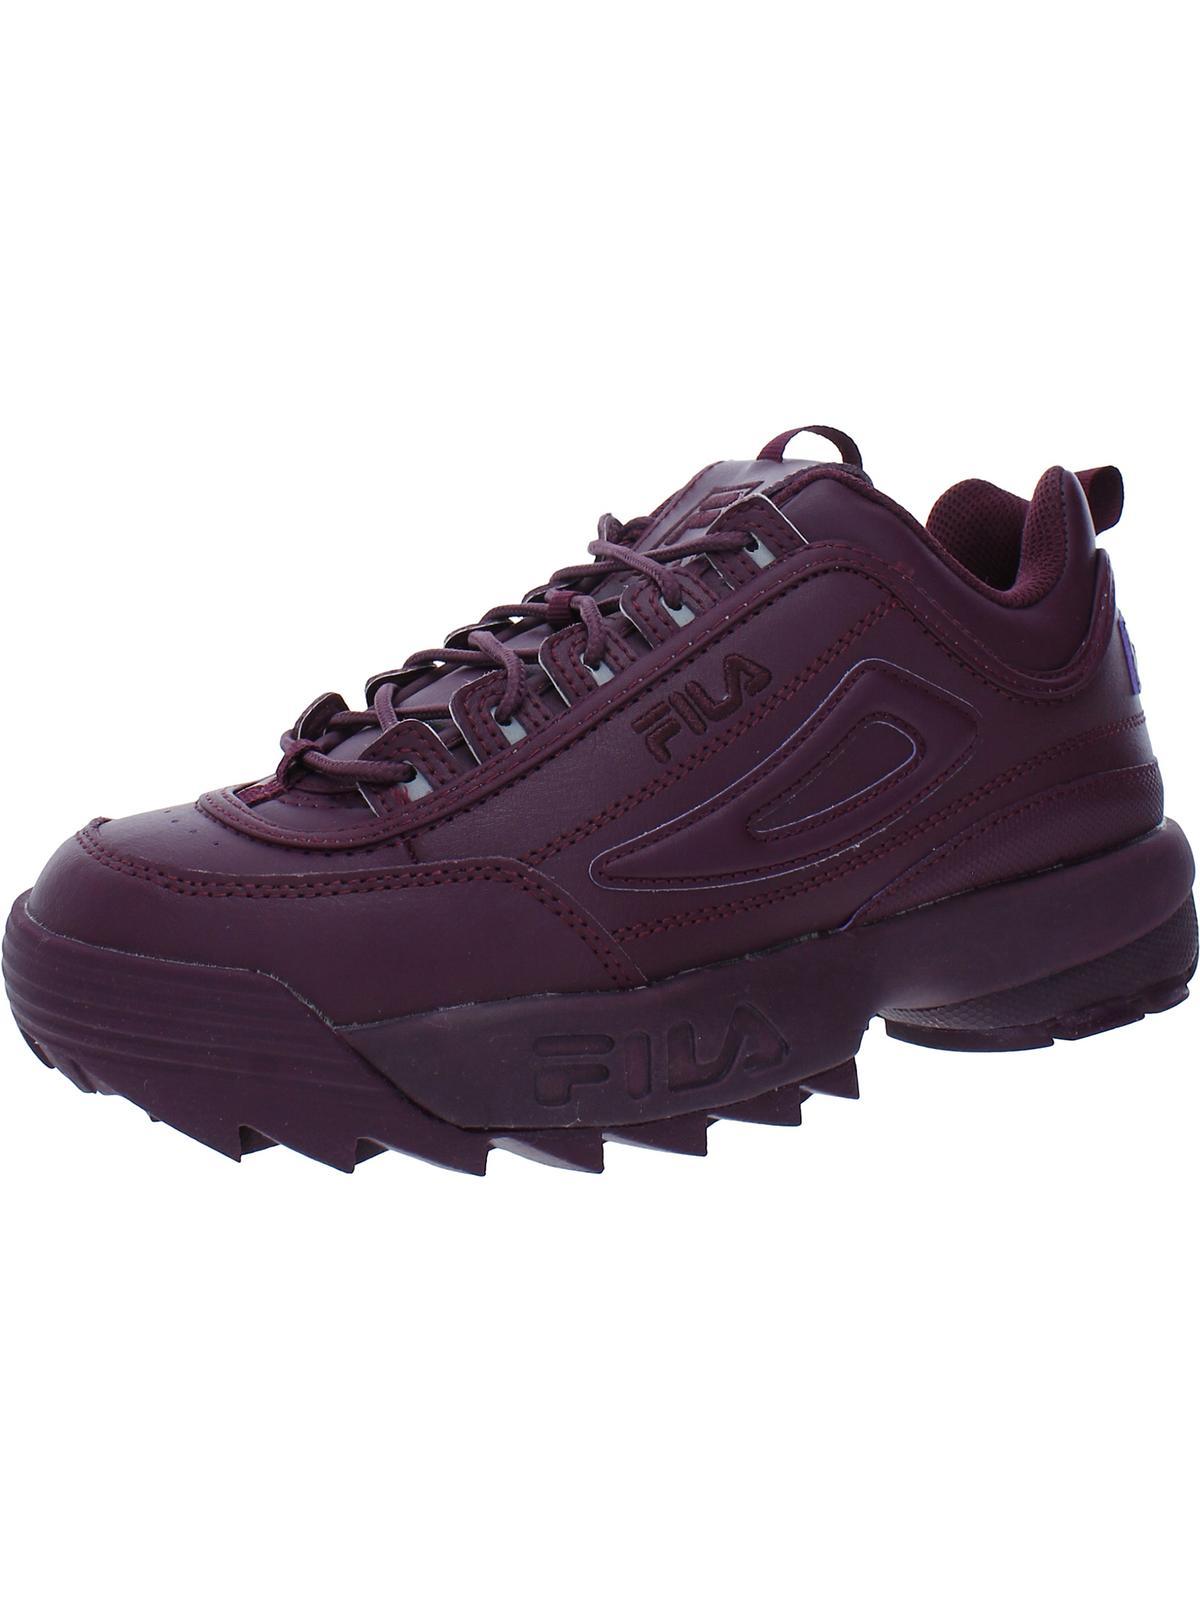 Fila Disruptor Ii Premium Leather Lace Up Athletic And Training Shoes in  Purple | Lyst